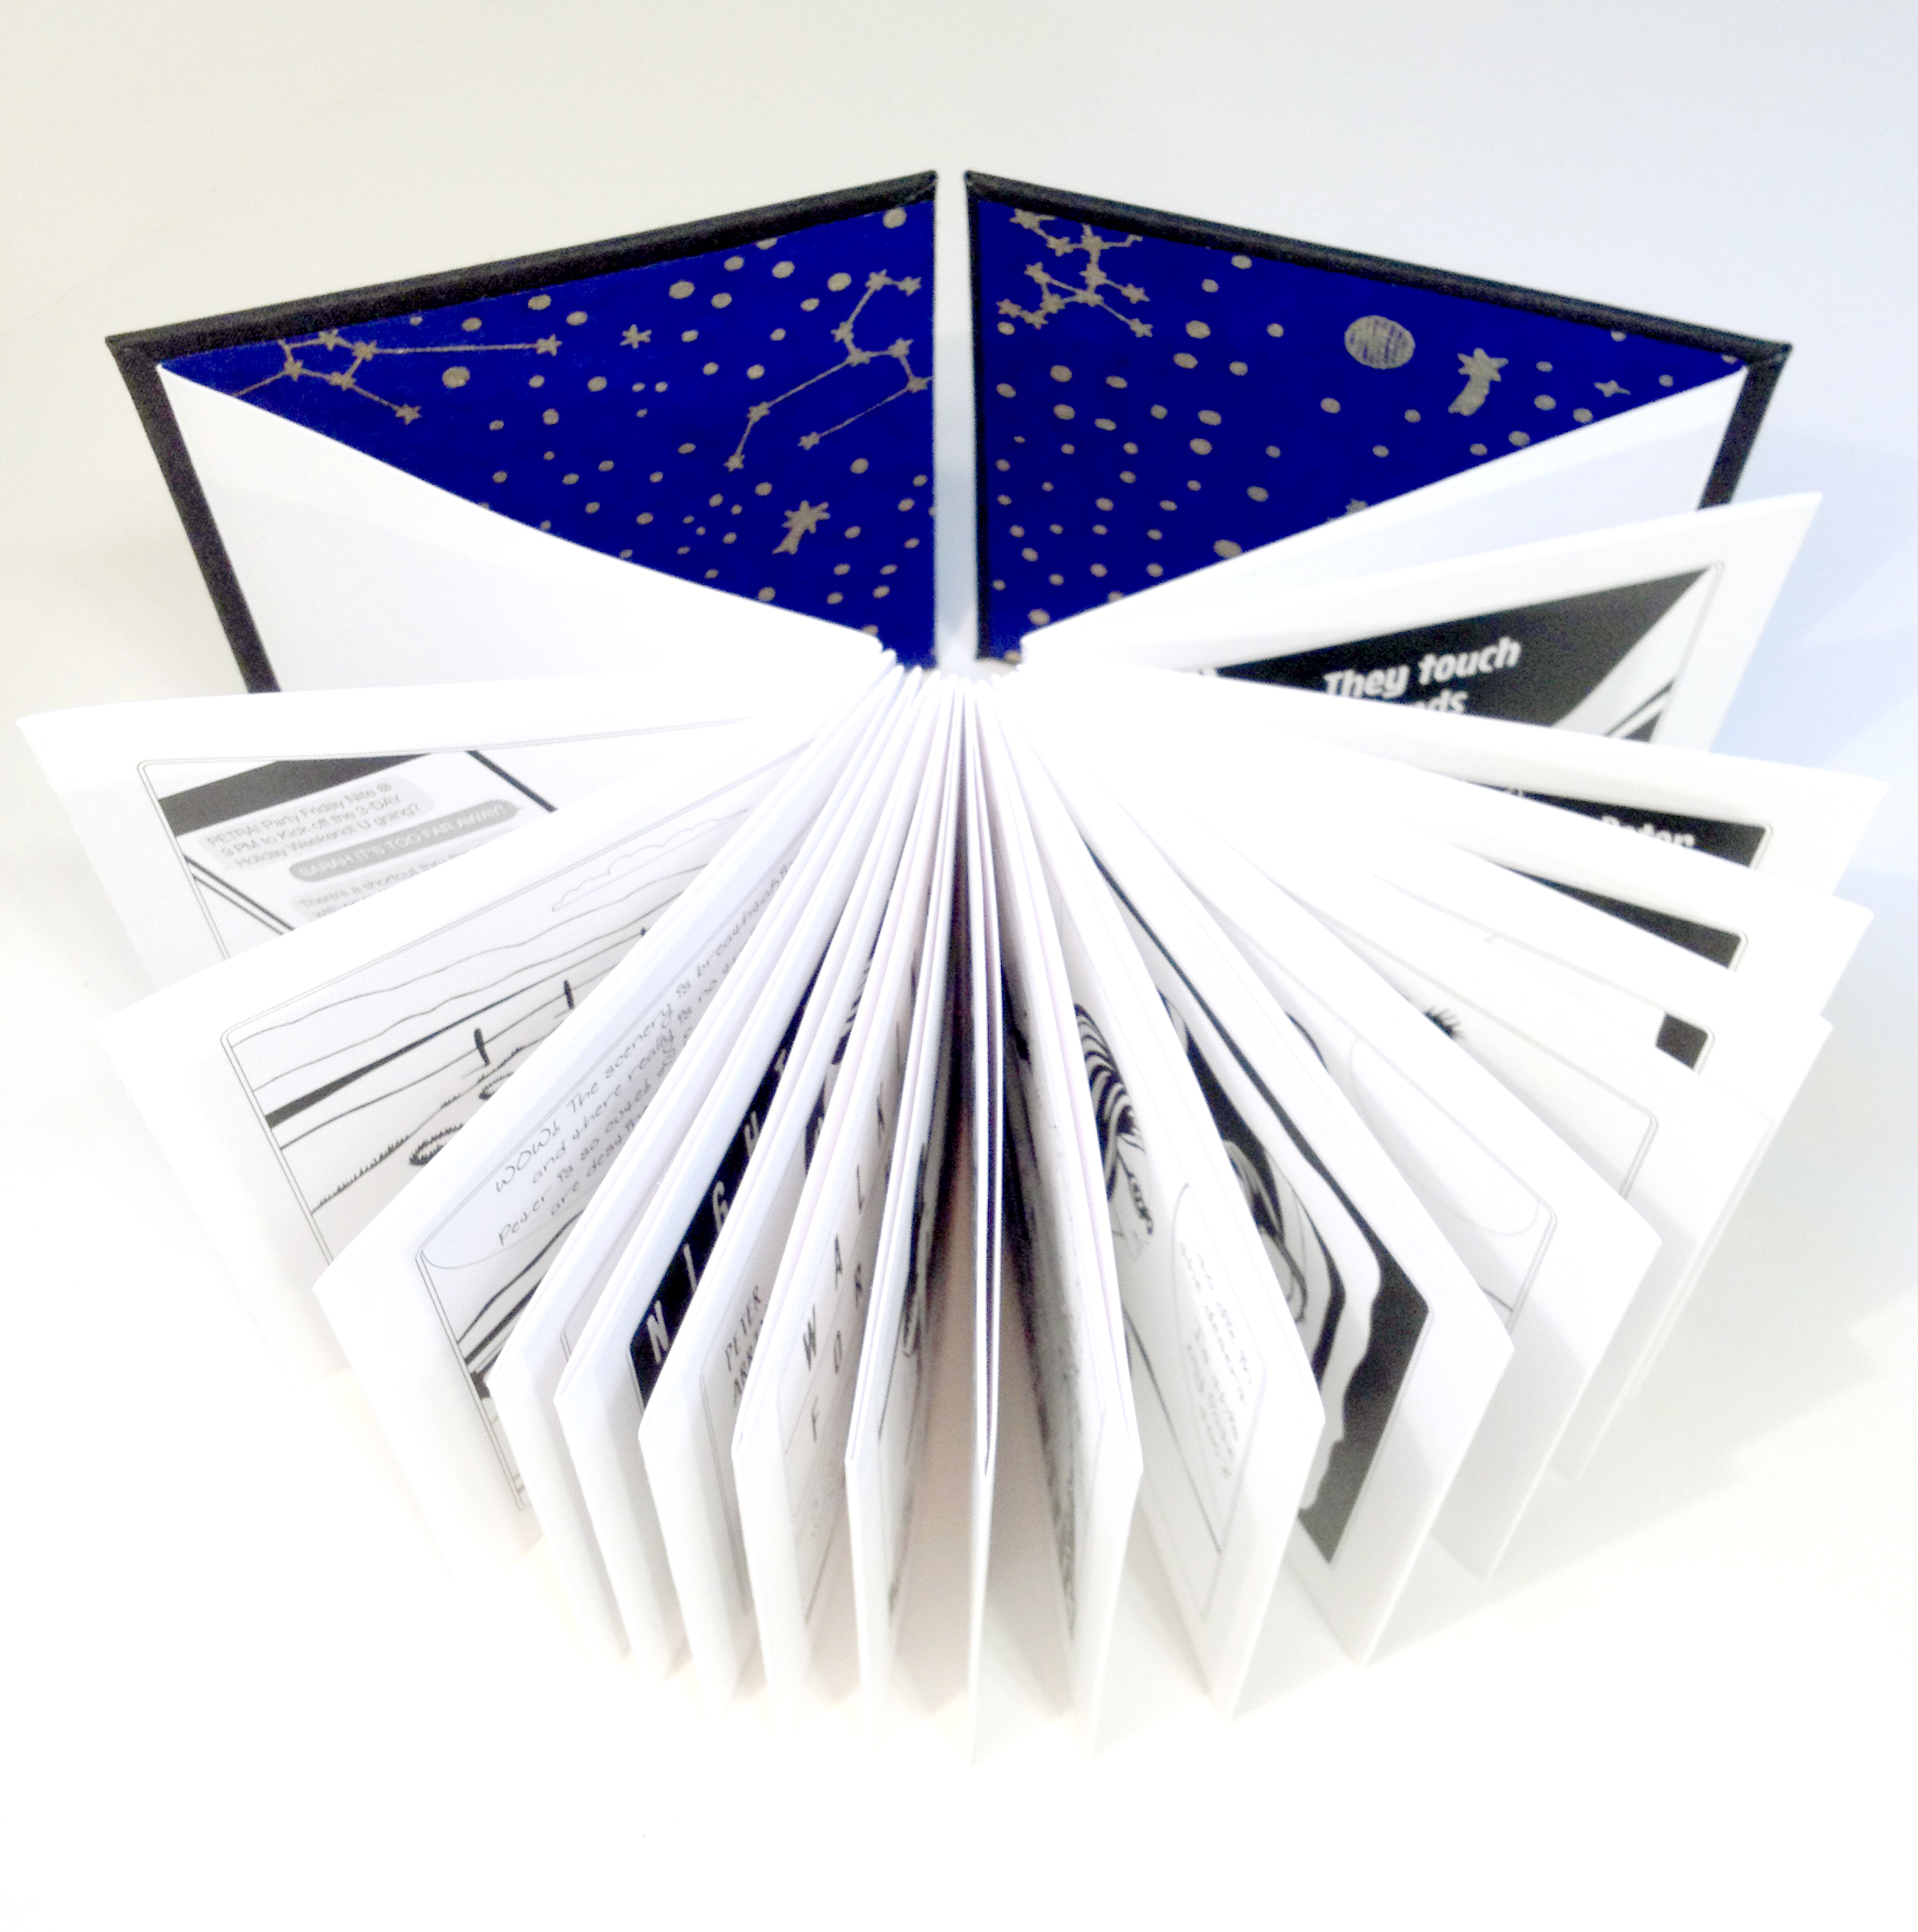 Open book with bright blue endpapers with silver constellations printed on them